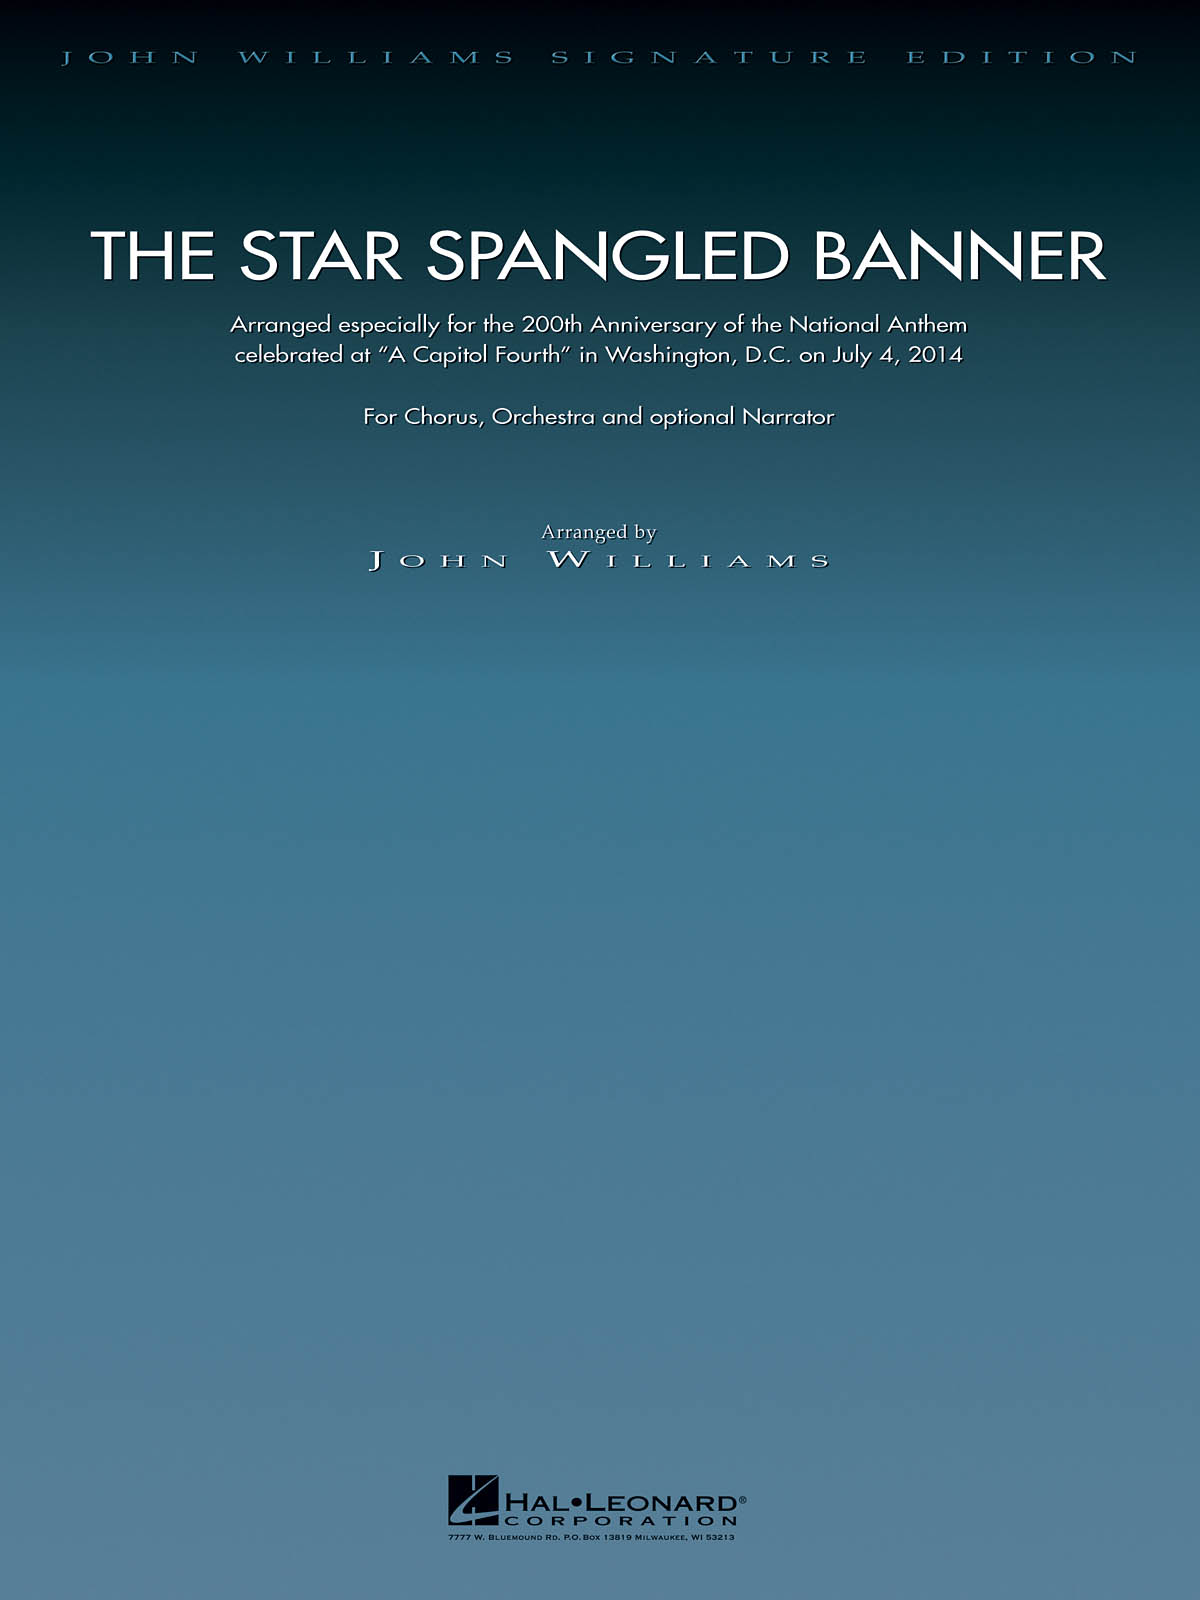 The Star Spangled Banner-200th Anniversary Edition: Orchestra: Score & Parts